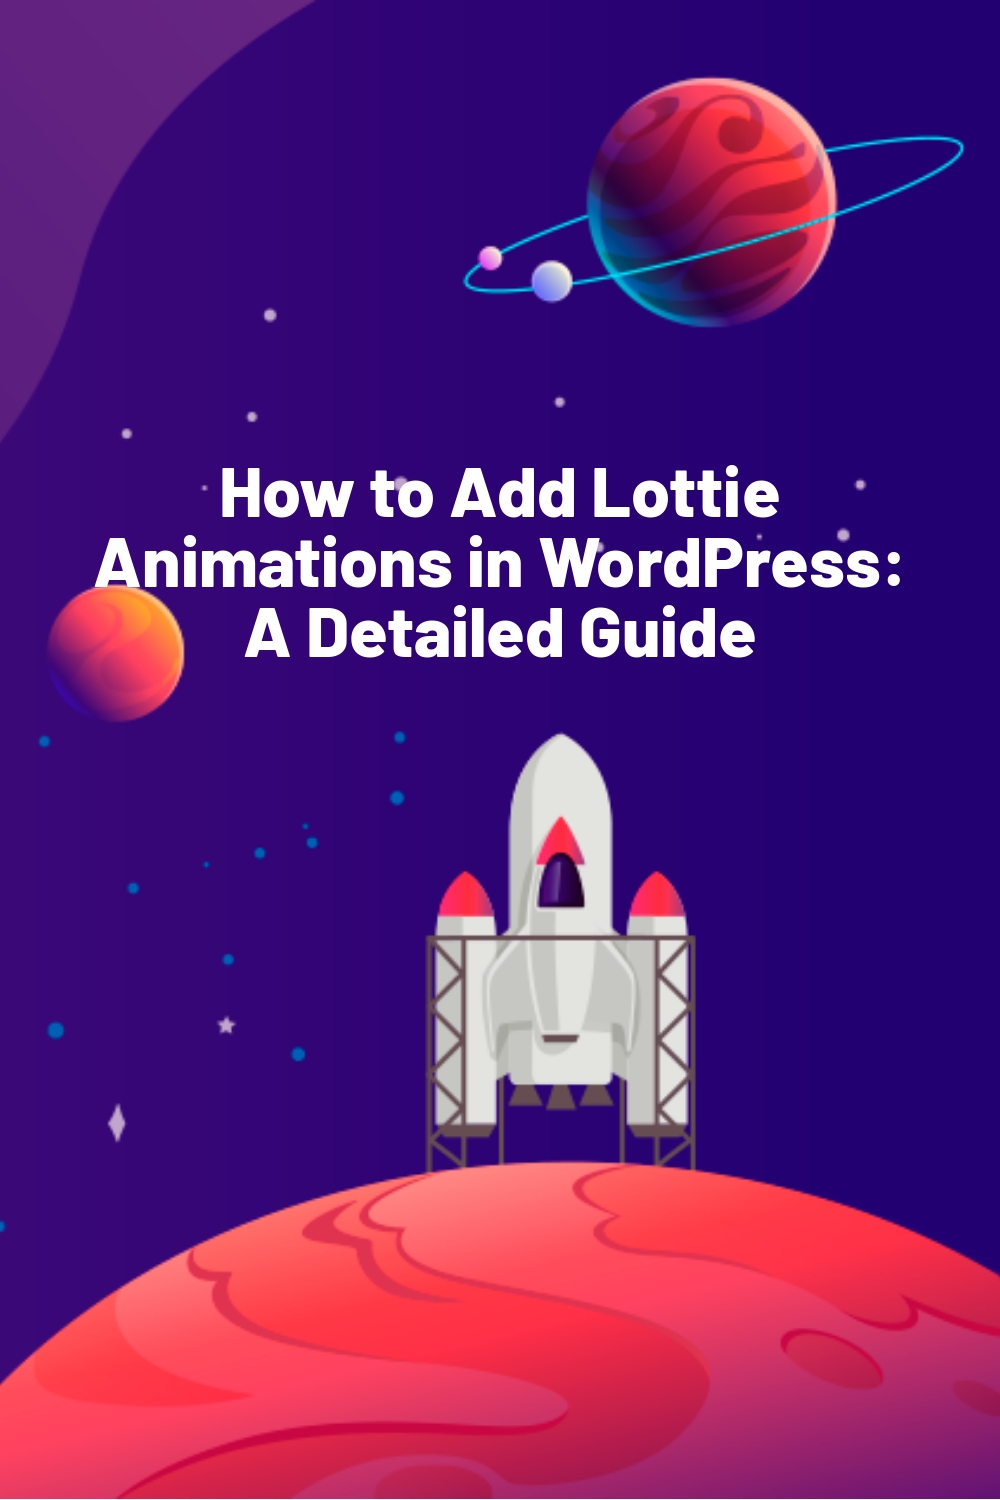 How to Add Lottie Animations in WordPress: A Detailed Guide